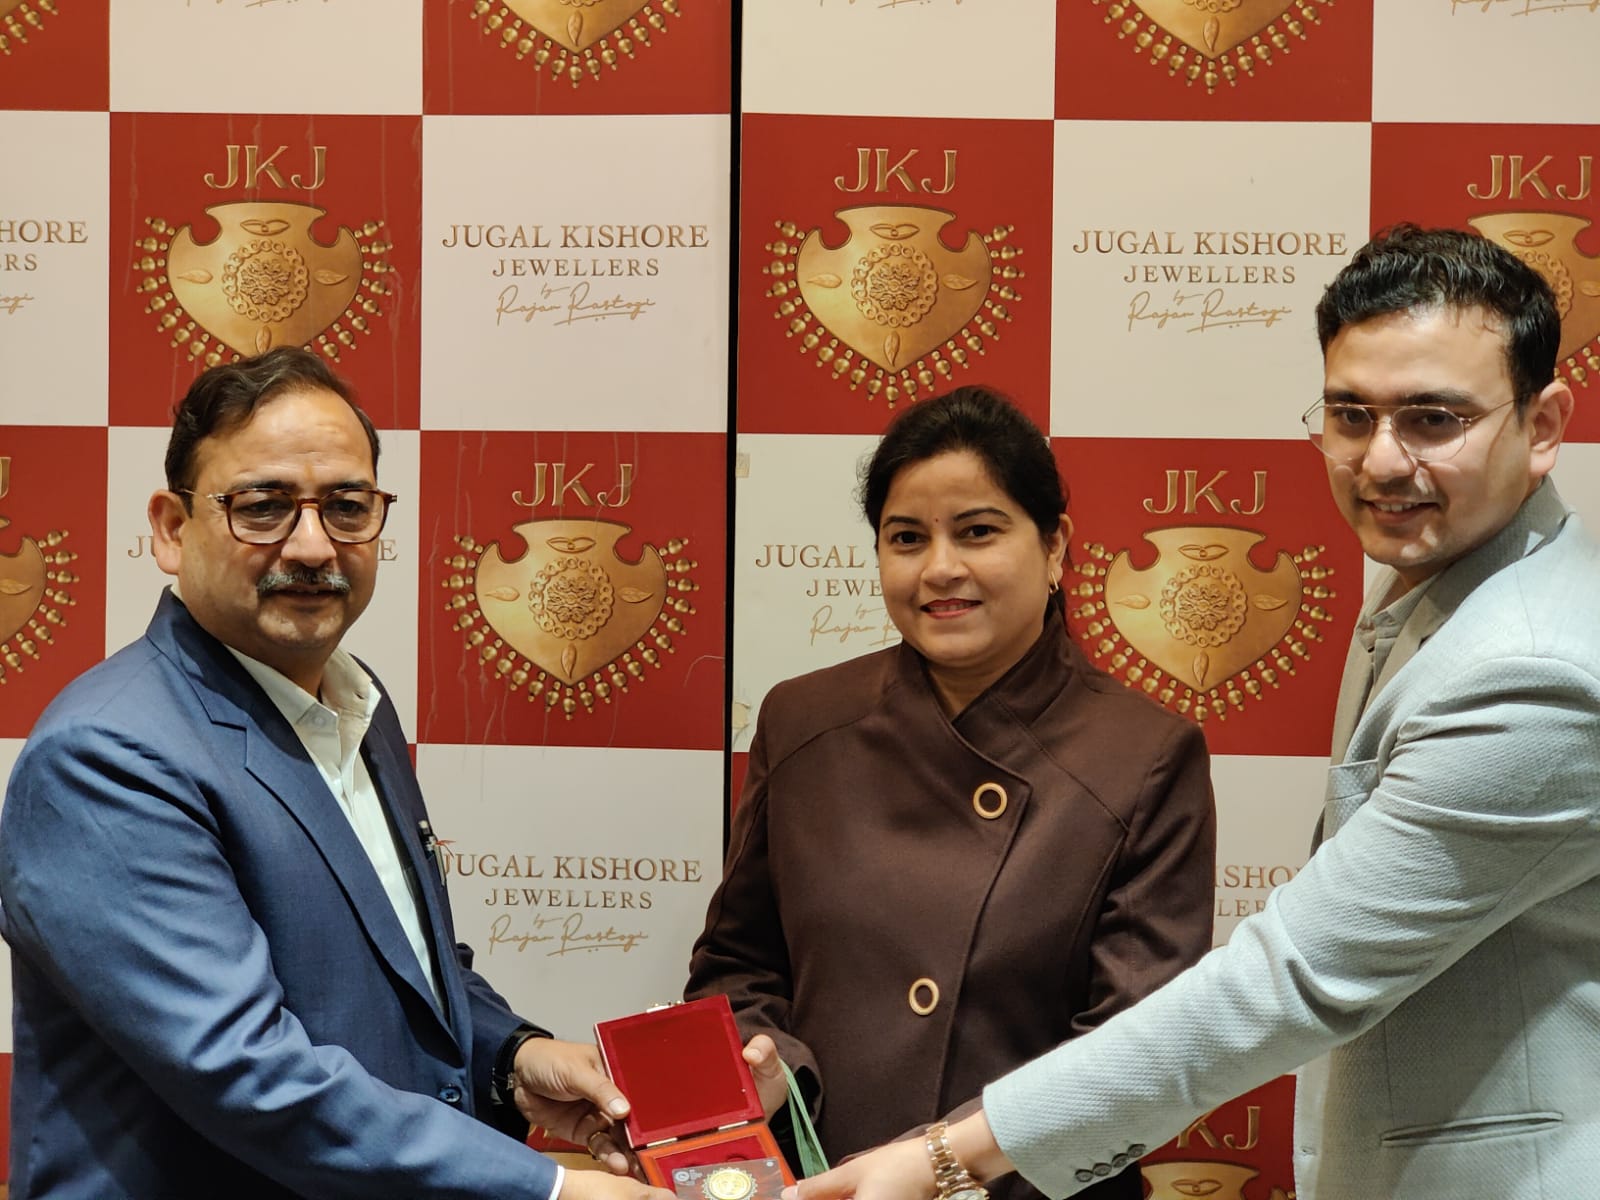 Winners of India Jewellery Shopping Festival hosted by Jugal Kishore Jewelers, by Rajan Rastogi, receive gold and diamond-studded gold coins